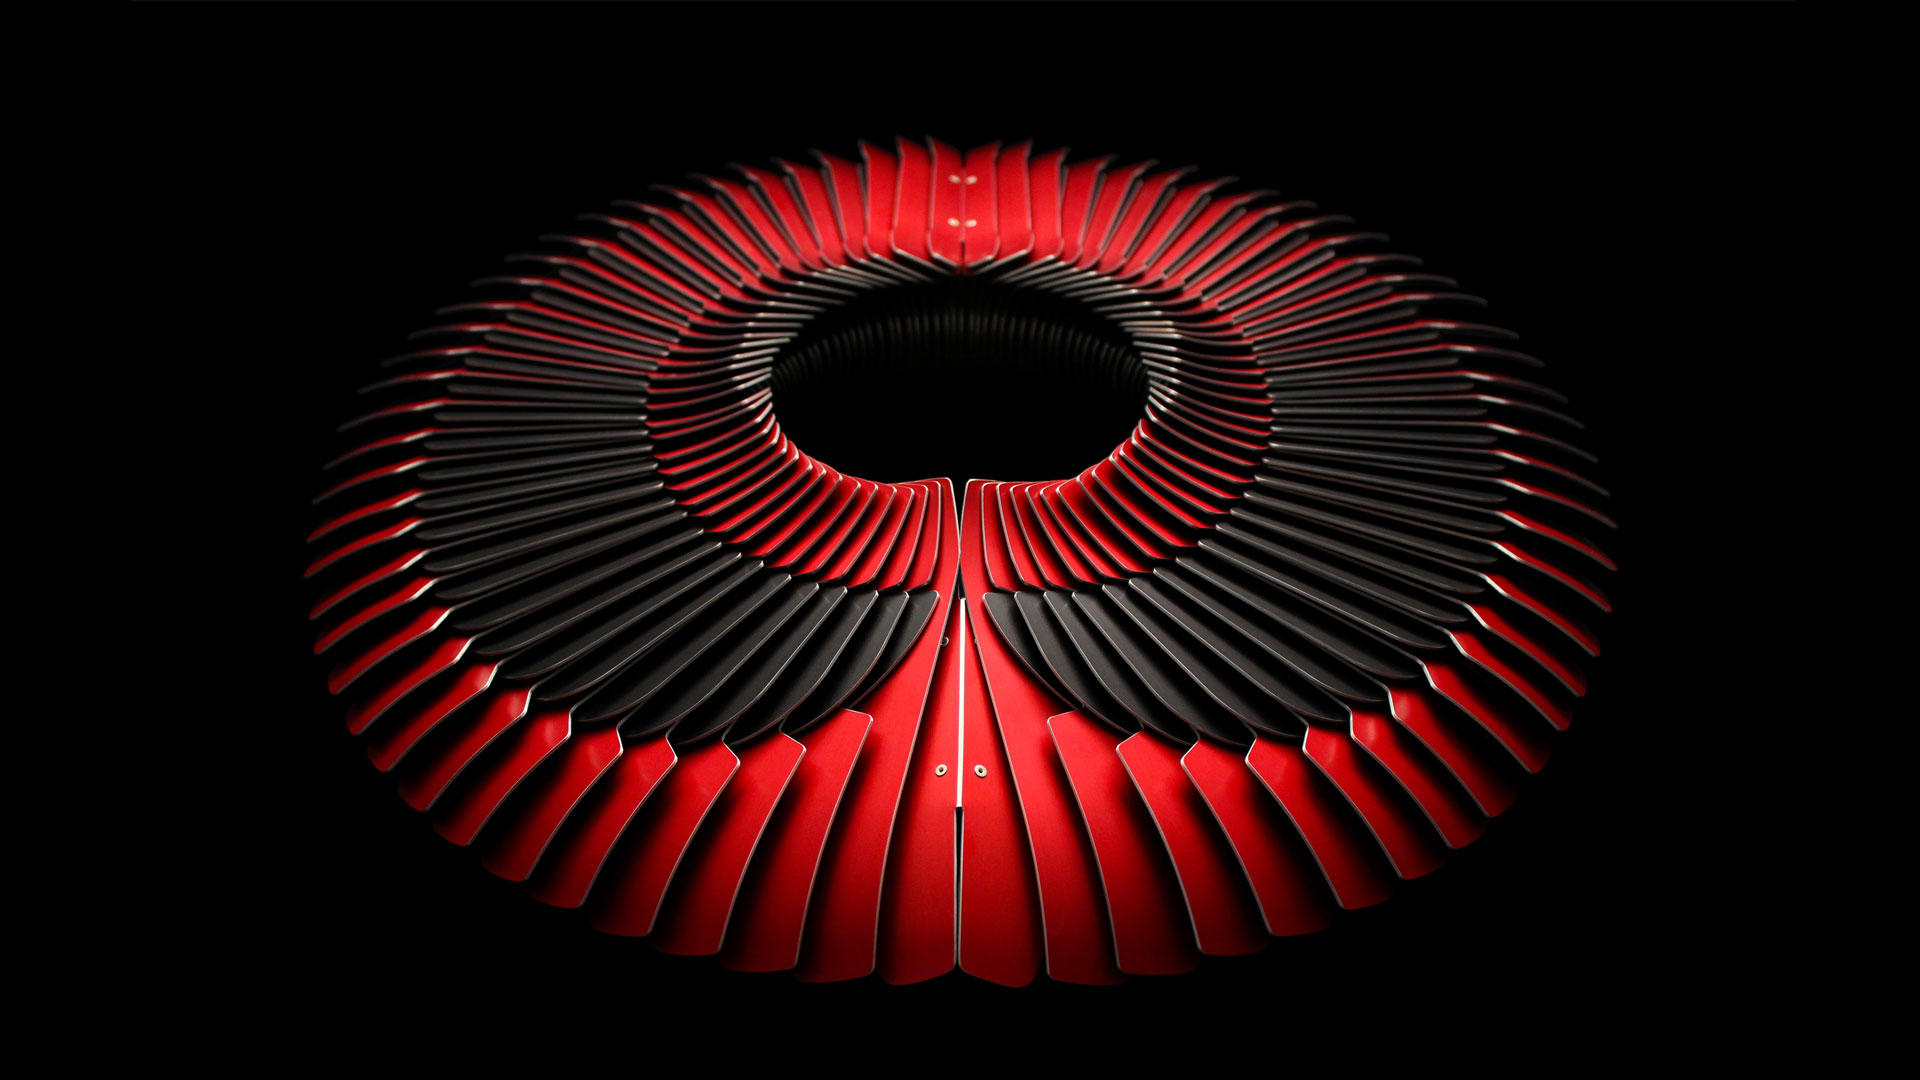 A large circular red and black metal neckpiece constructed like a collar and photographed on a black background. There are three layers of flat and shaped metal segments which overlap.